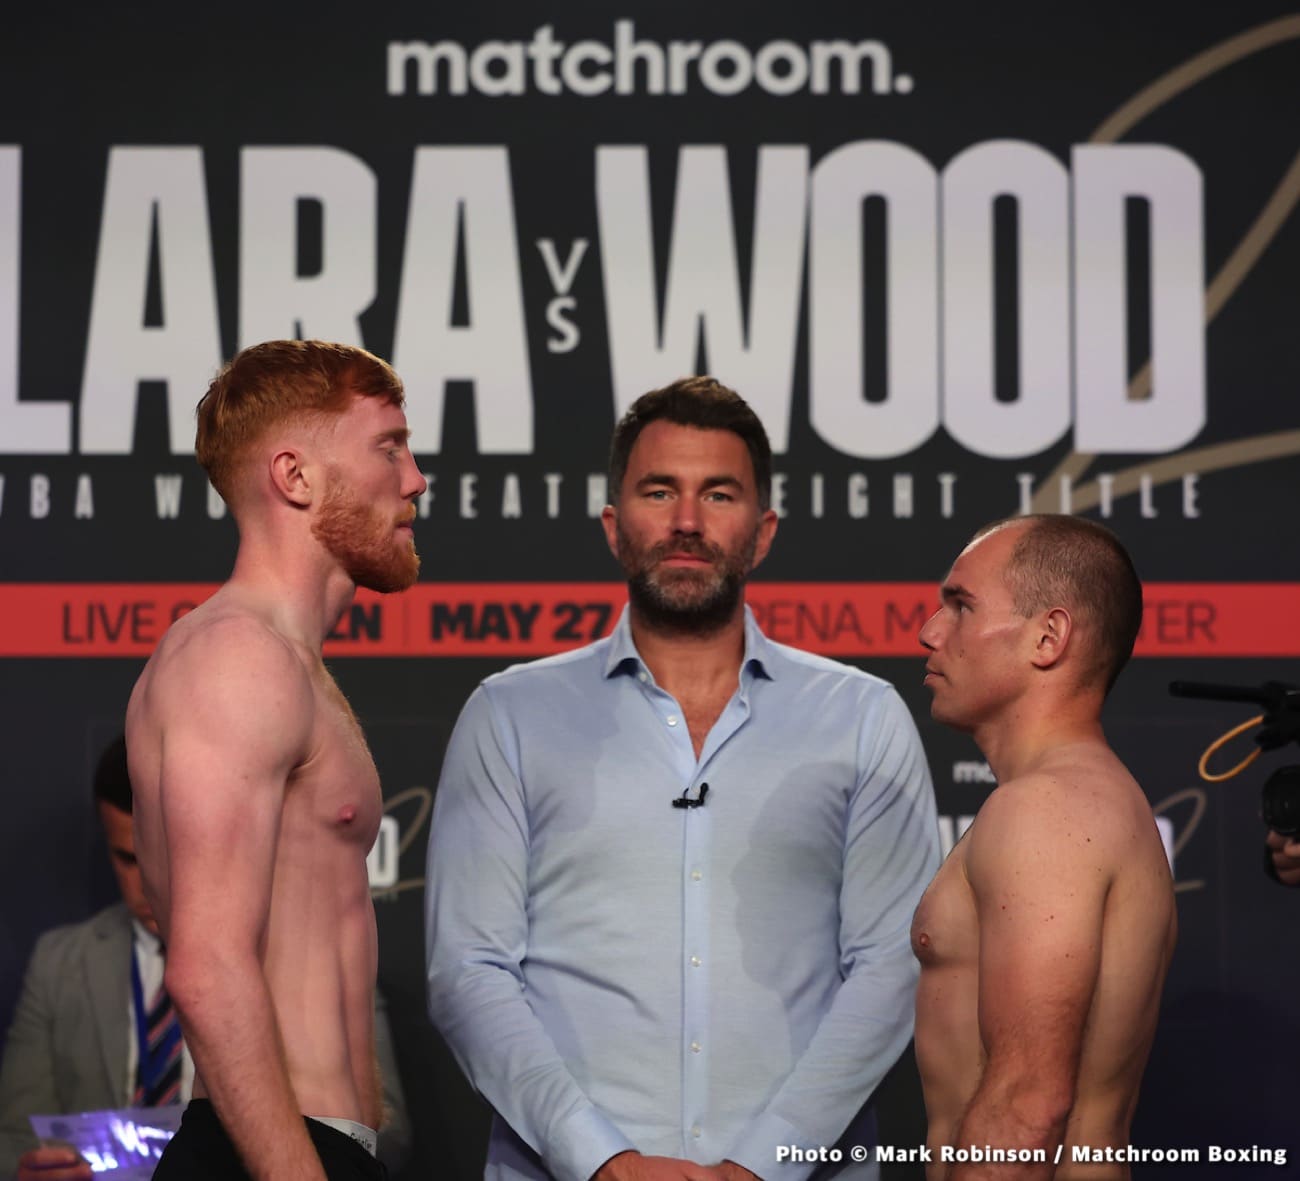 Image: Mauricio Lara stripped of WBA title, only Leigh Wood can win - weigh-in results